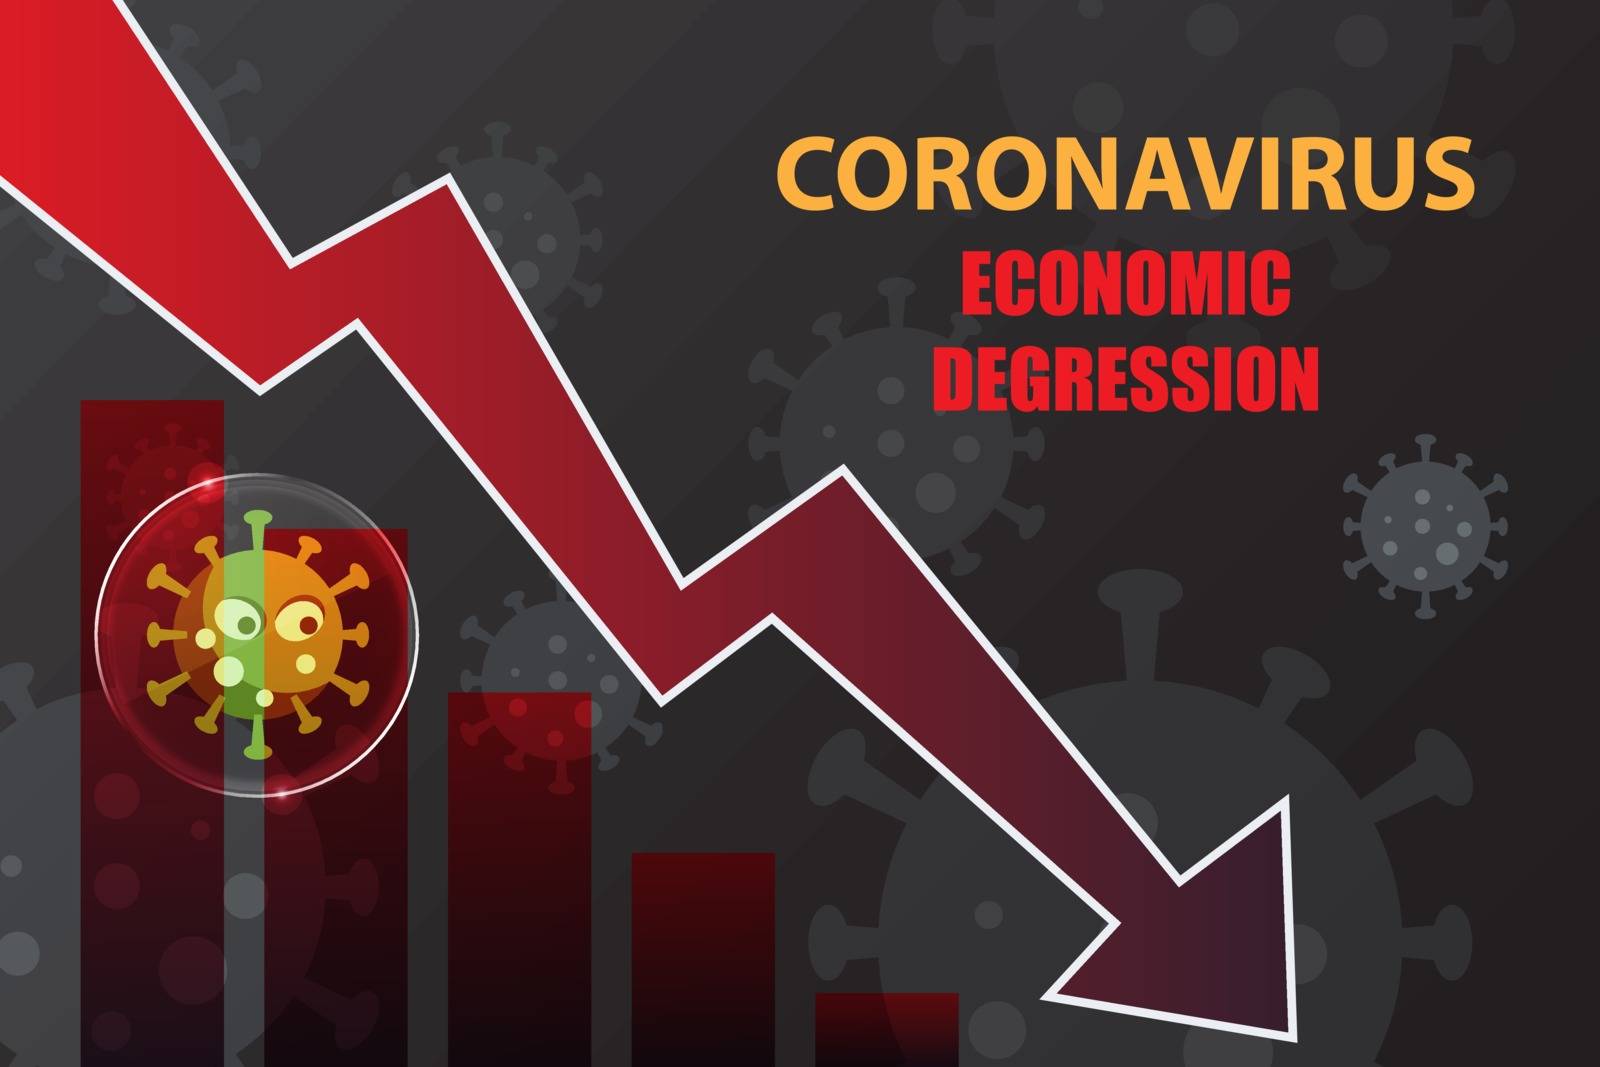 Economic crisis economy degression. Covid-19 coronavirus pandemic outbreak on black background. Health care and medical business financial concept.